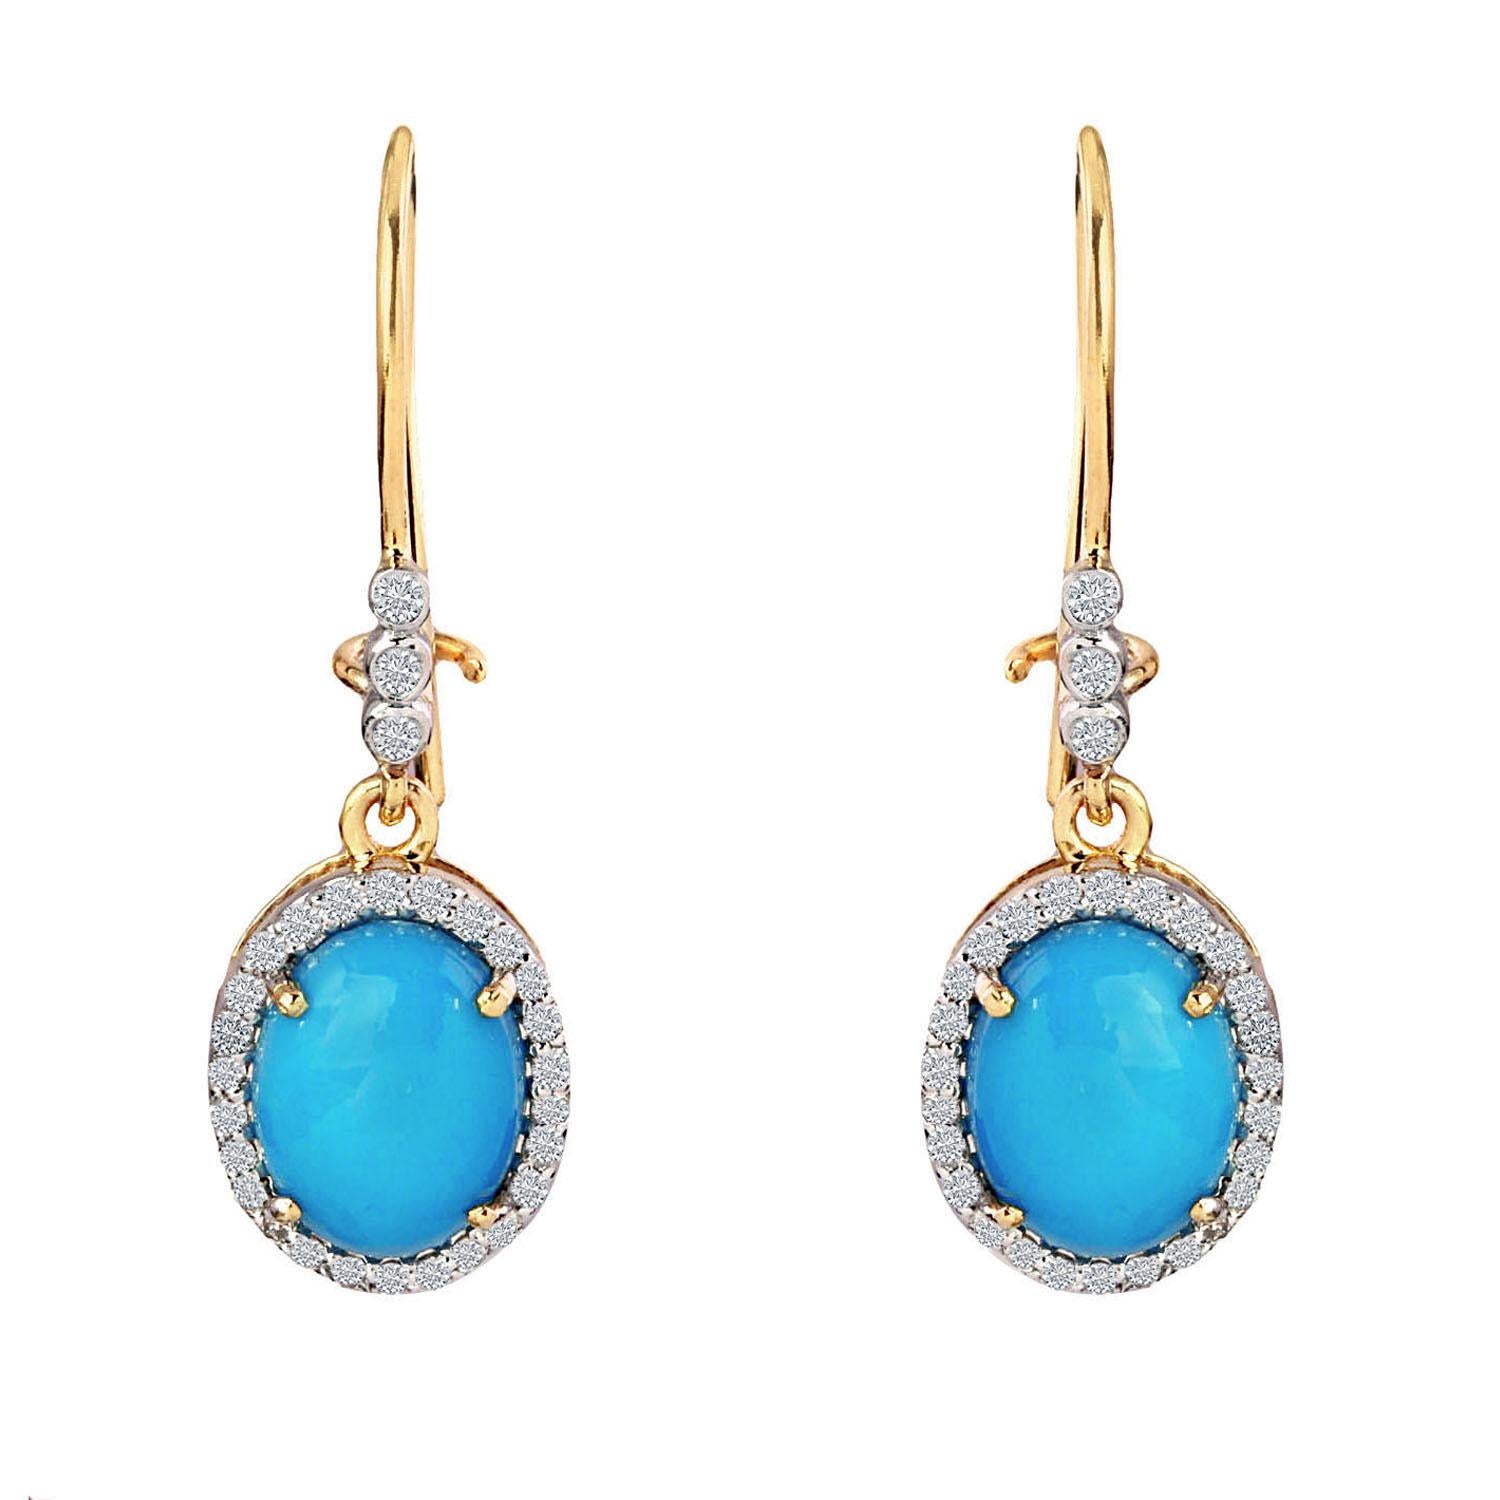 Stunning turquoise gemstone hook earrings in 14k yellow gold and brilliant cut diamonds add elegance to your look. Minimal and beautiful, these drop earrings are here to take your everyday look up a notch. Made with a combination of turquoise stone